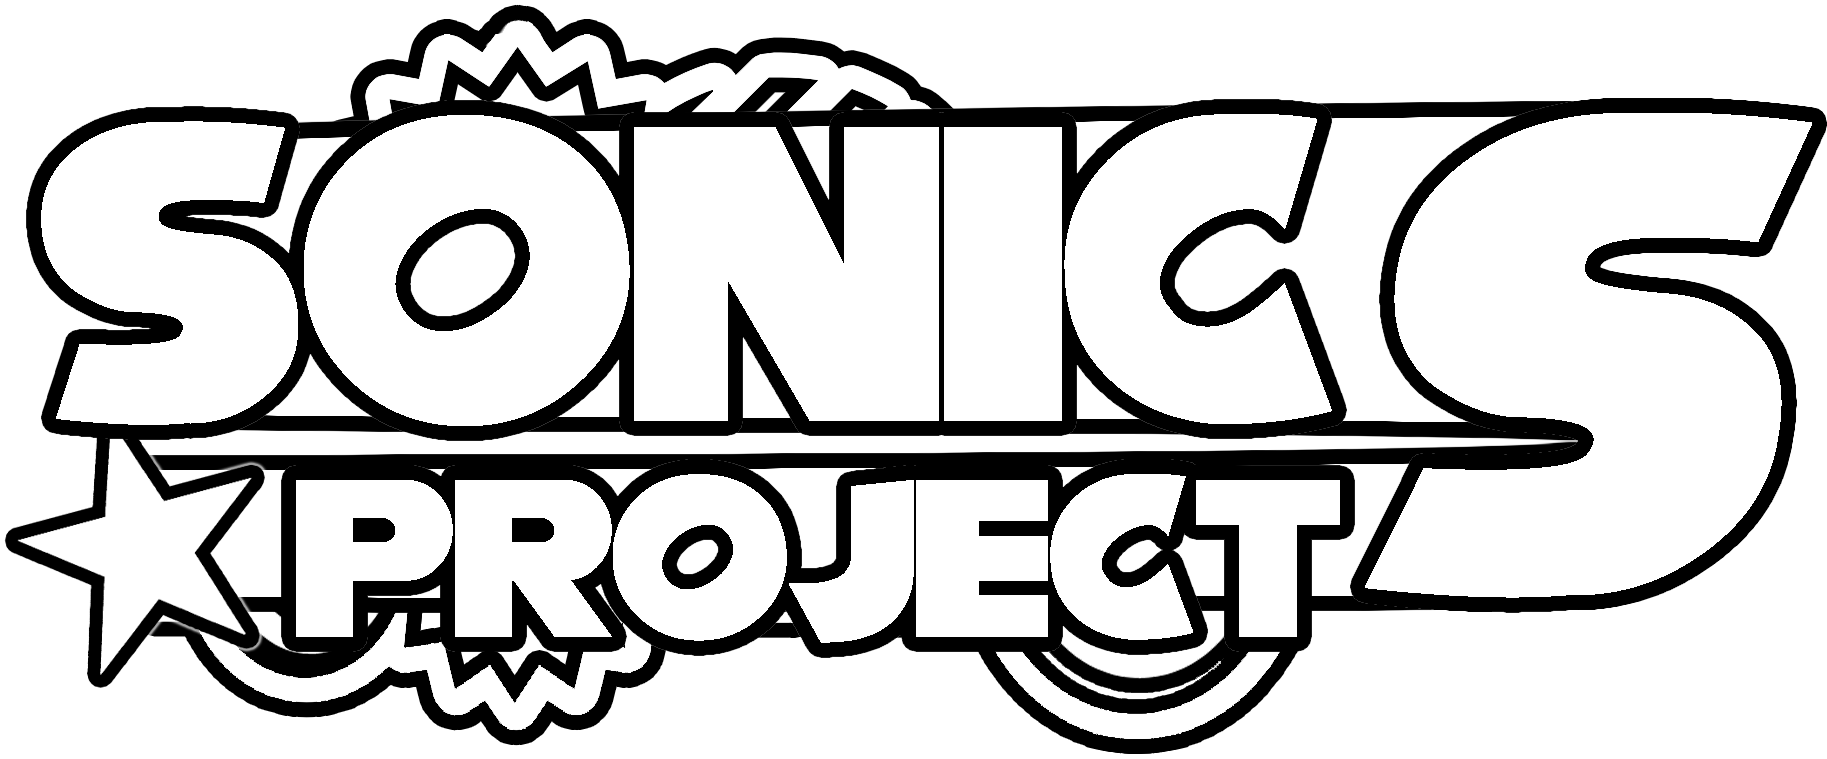 sonicprojectSlogo.png